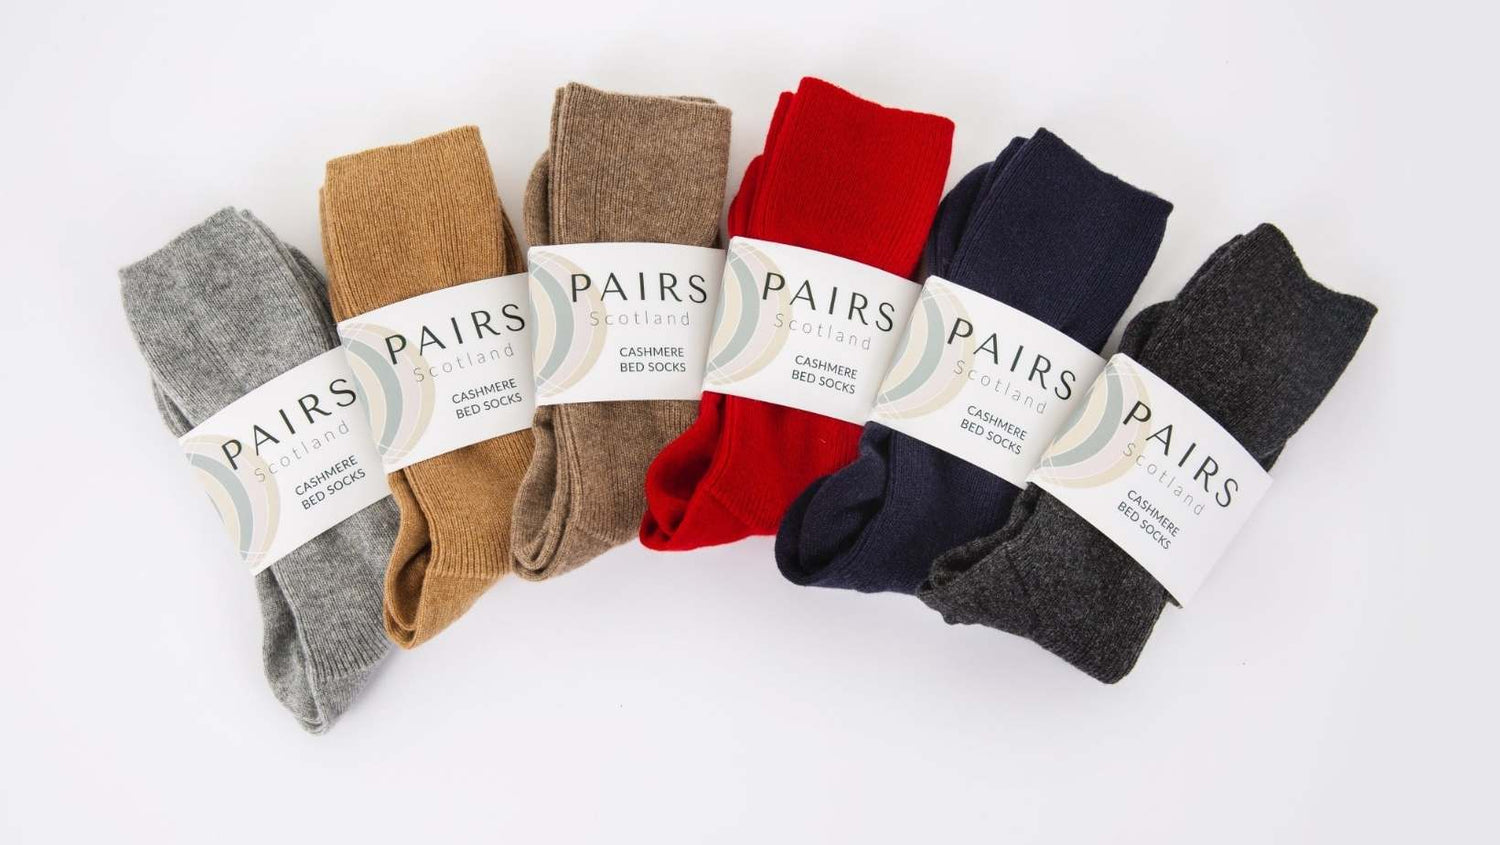 Our Cashmere Bed Socks - Made in Scotland